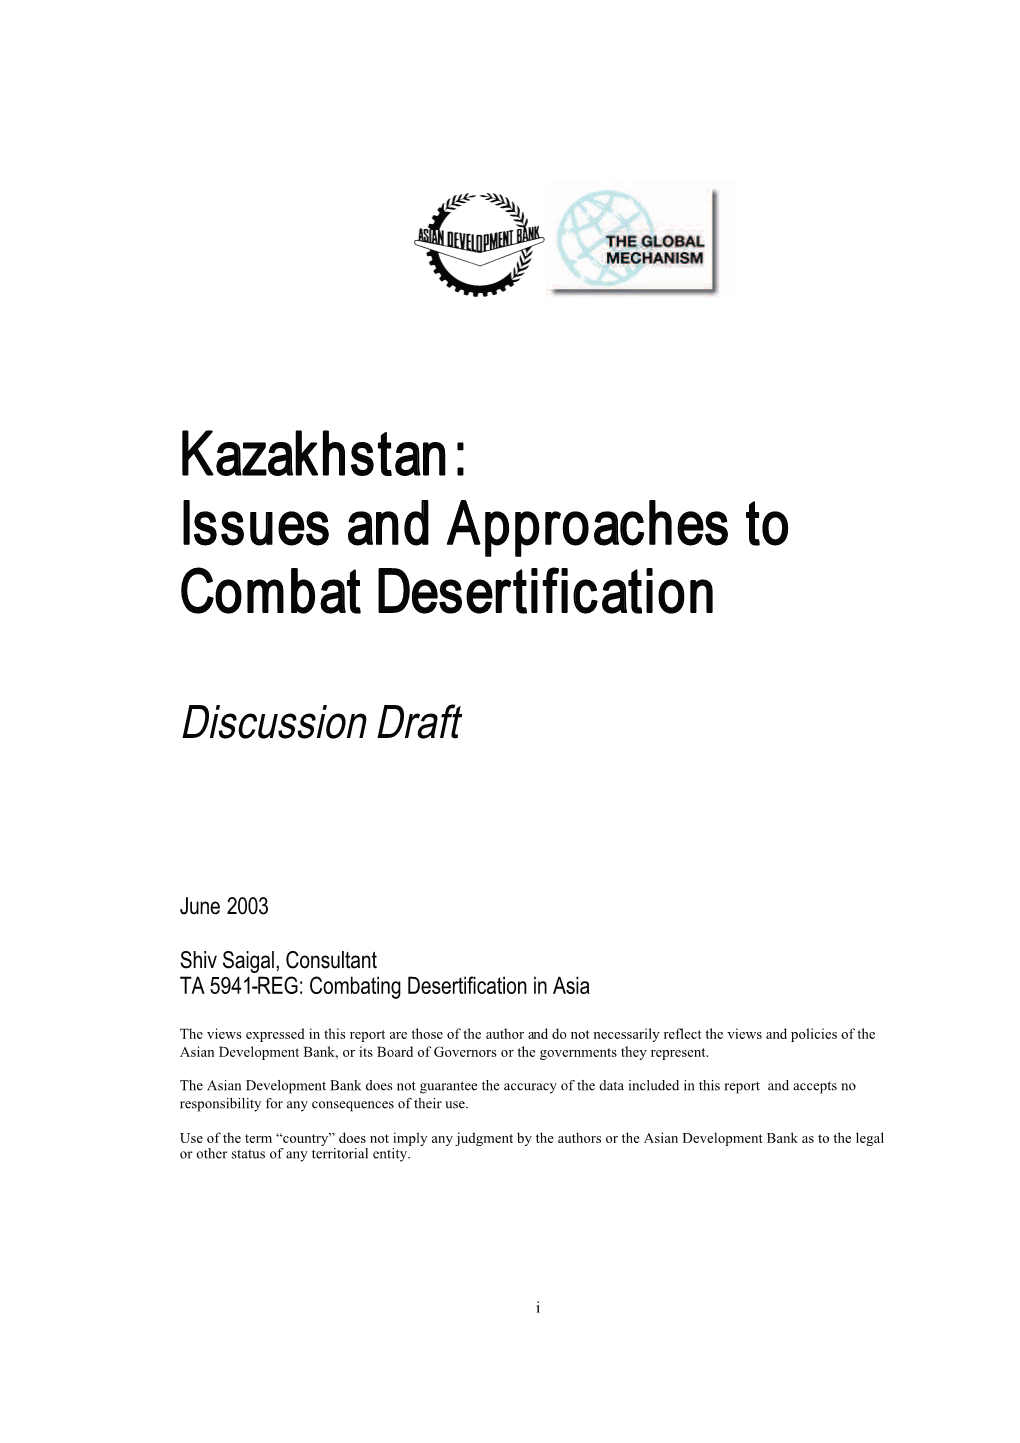 Kazakhstan: Issues and Approaches to Combat Desertification